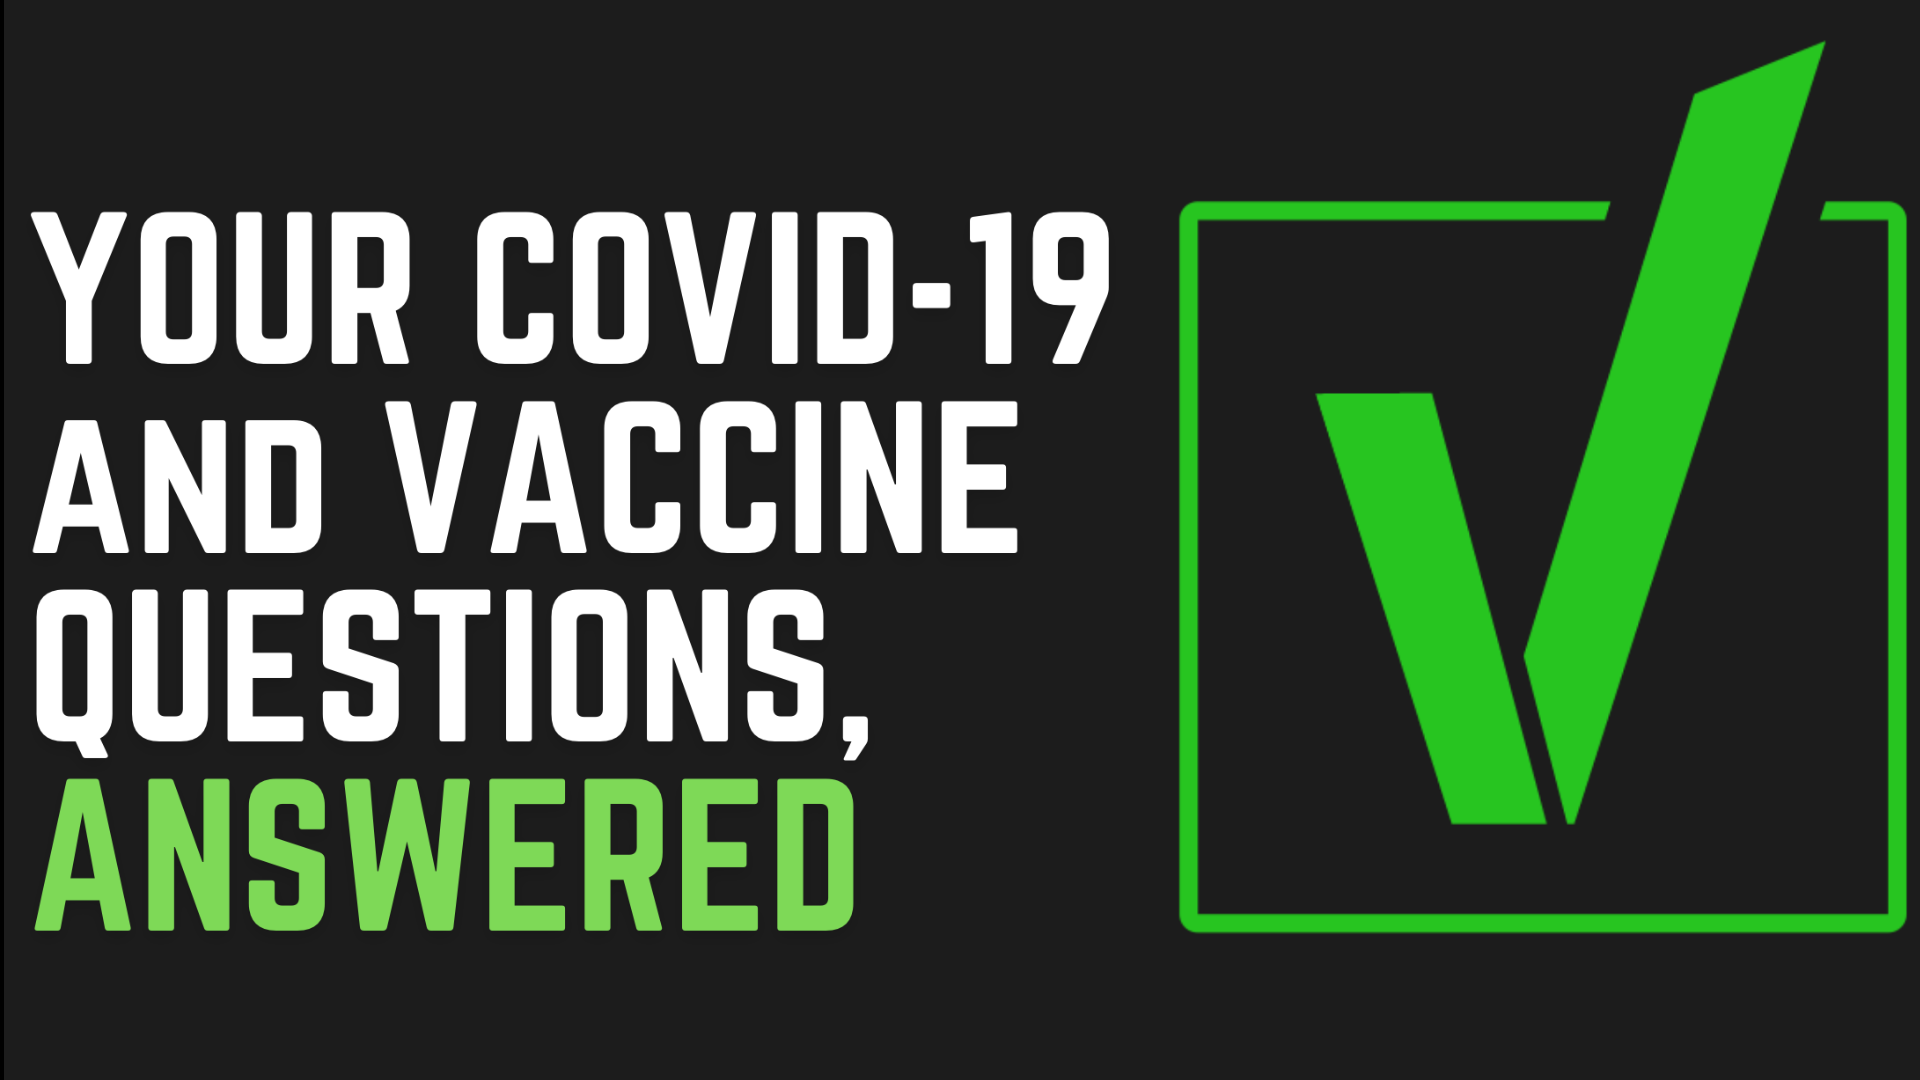 There's a lot of misinformation out there about vaccines and what life looks like after the pandemic. So the Verify team brought your questions straight to experts.